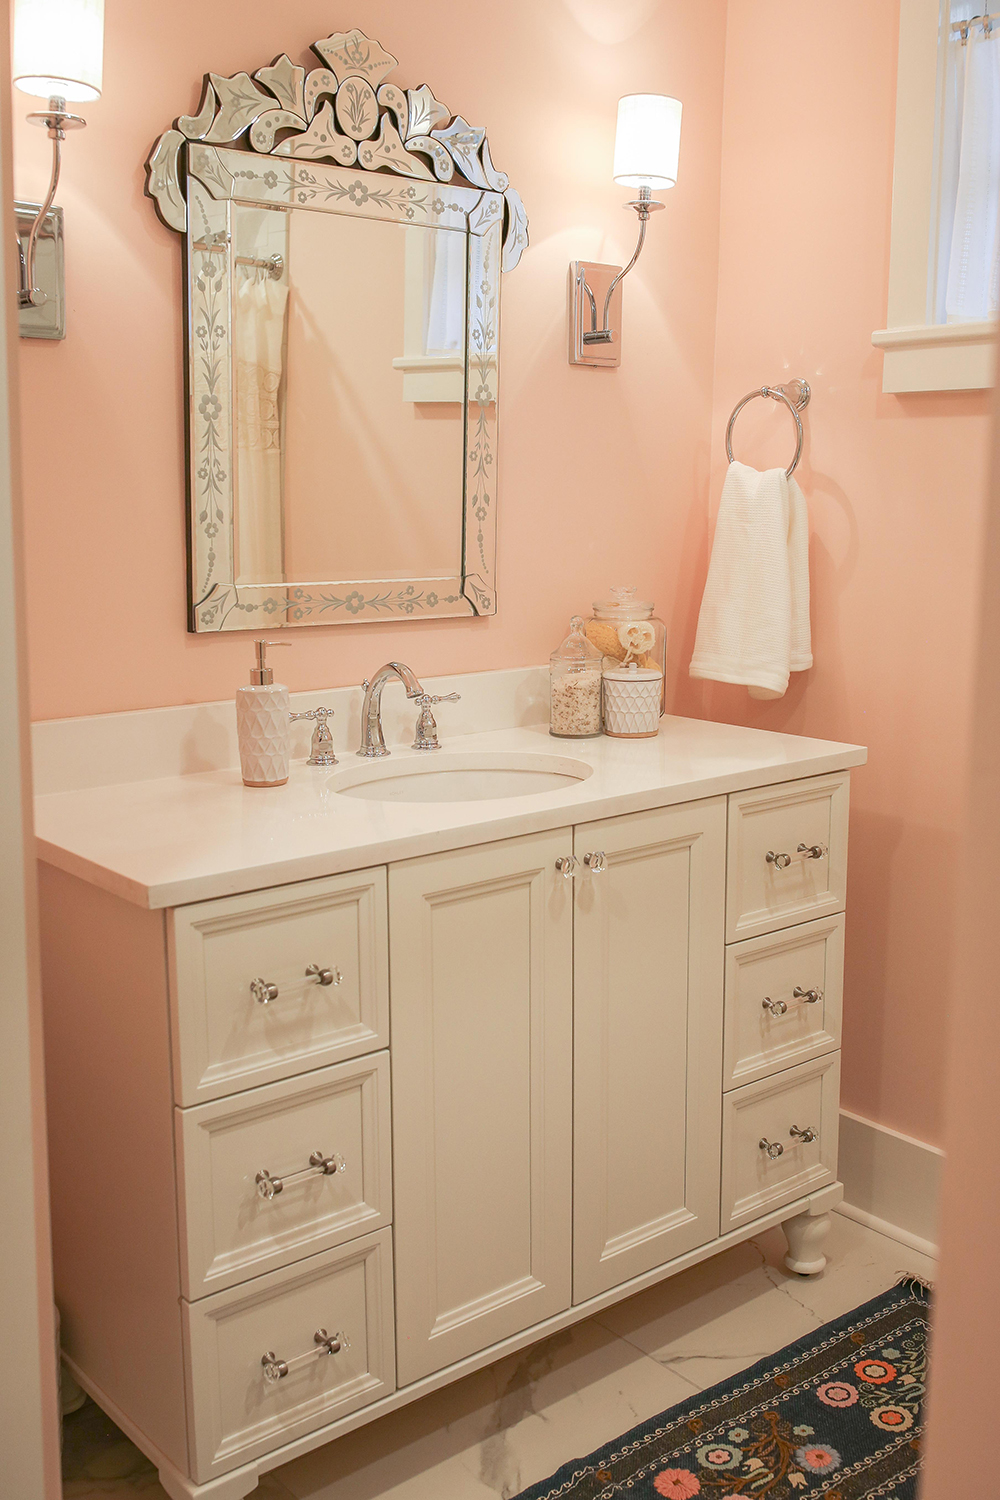 A blush pink master bathroom with porcelain tile that resembles marble and a decorative mirror